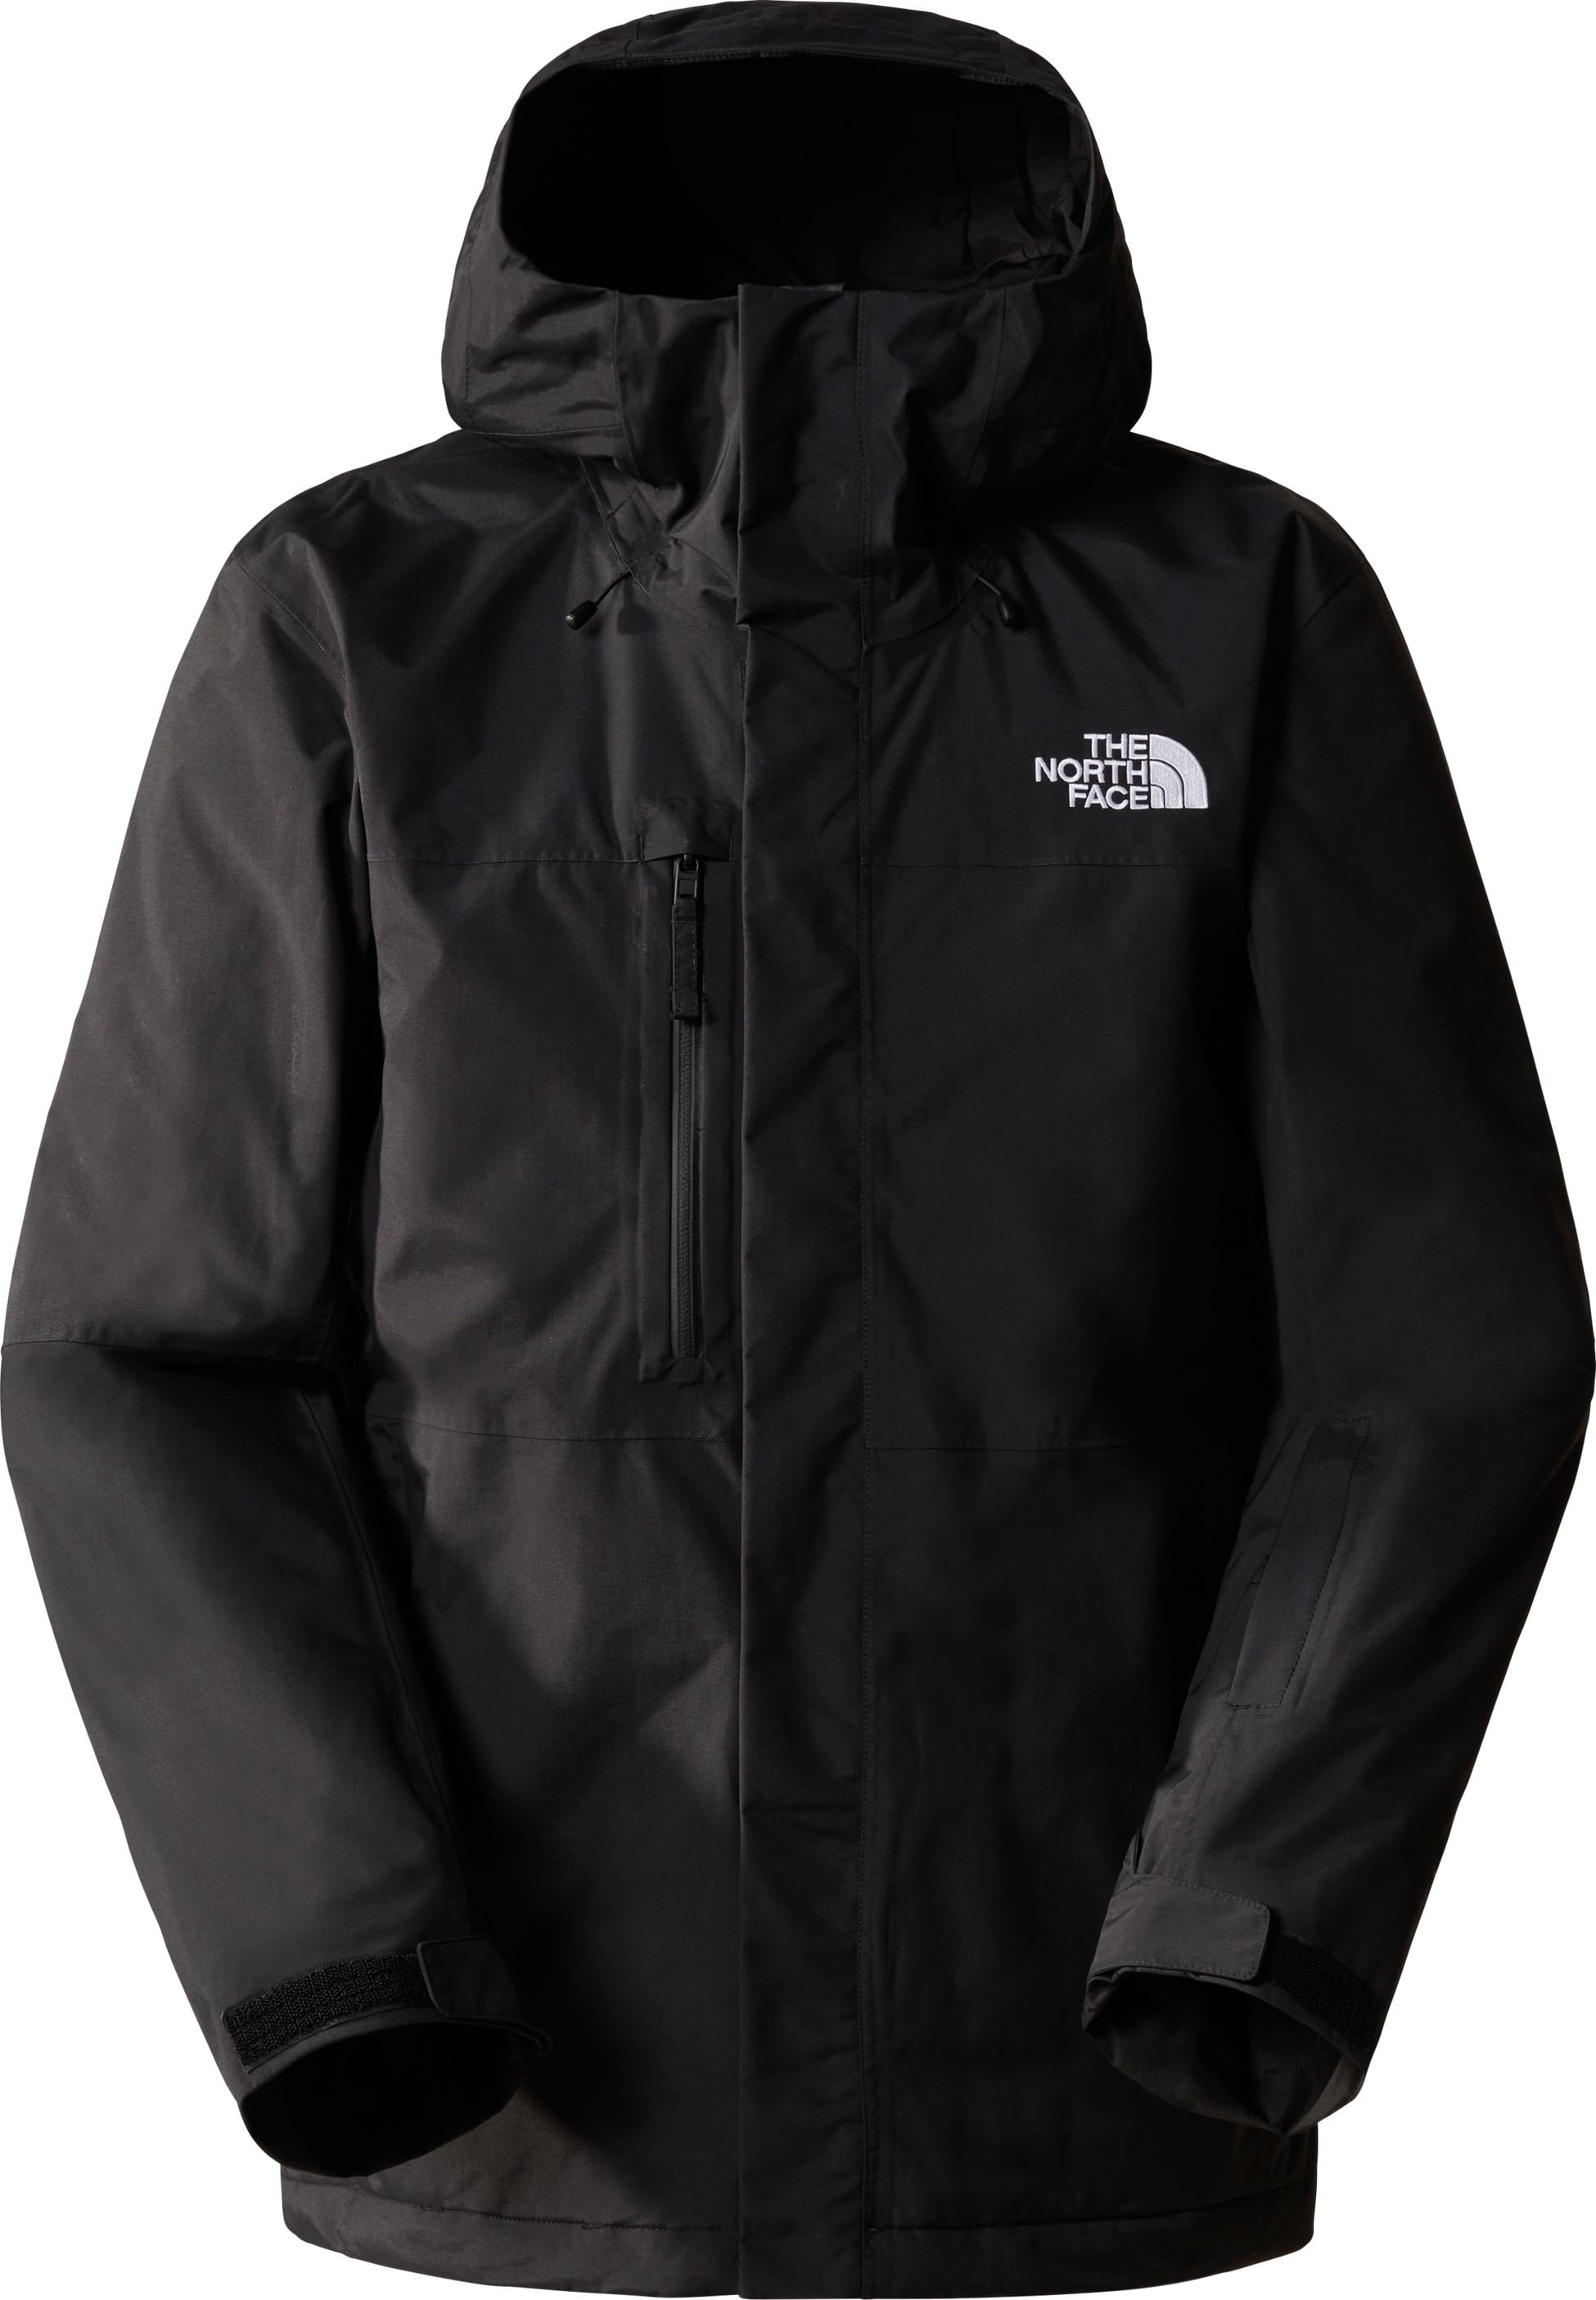 THE NORTH FACE, M FREEDOM INSULATED JACKET